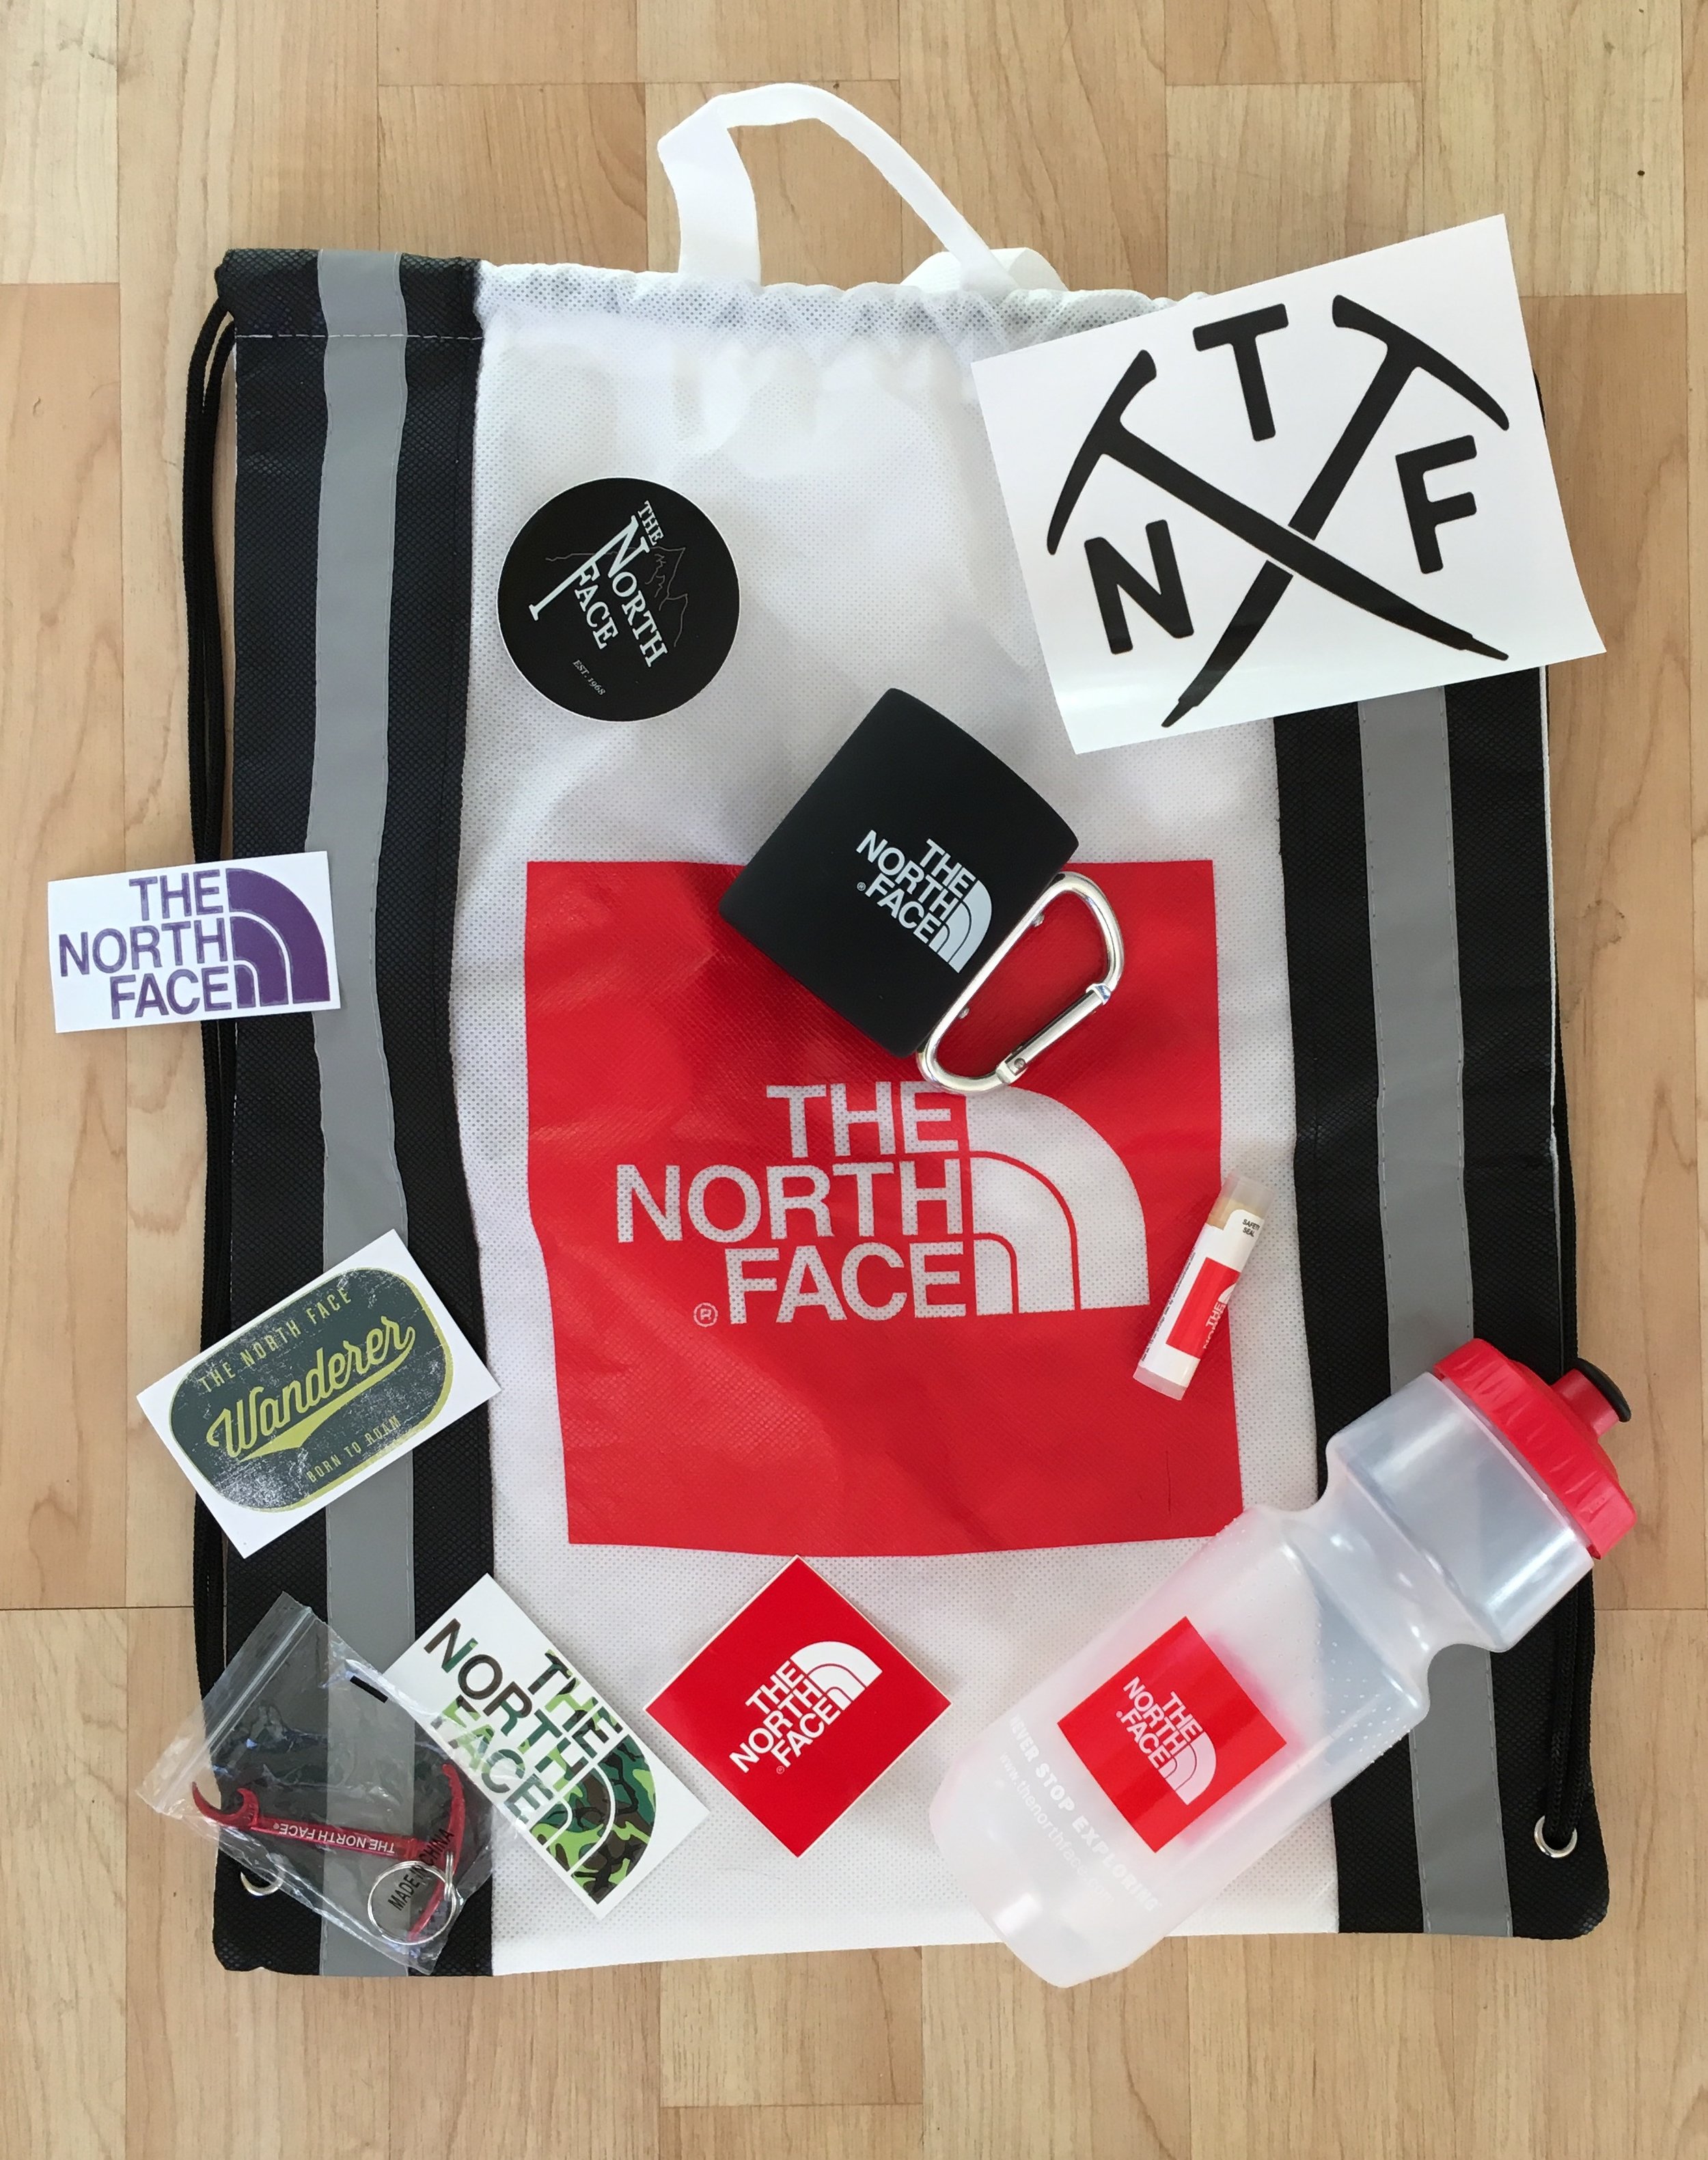 Thank You North Face for your generous gift donations!